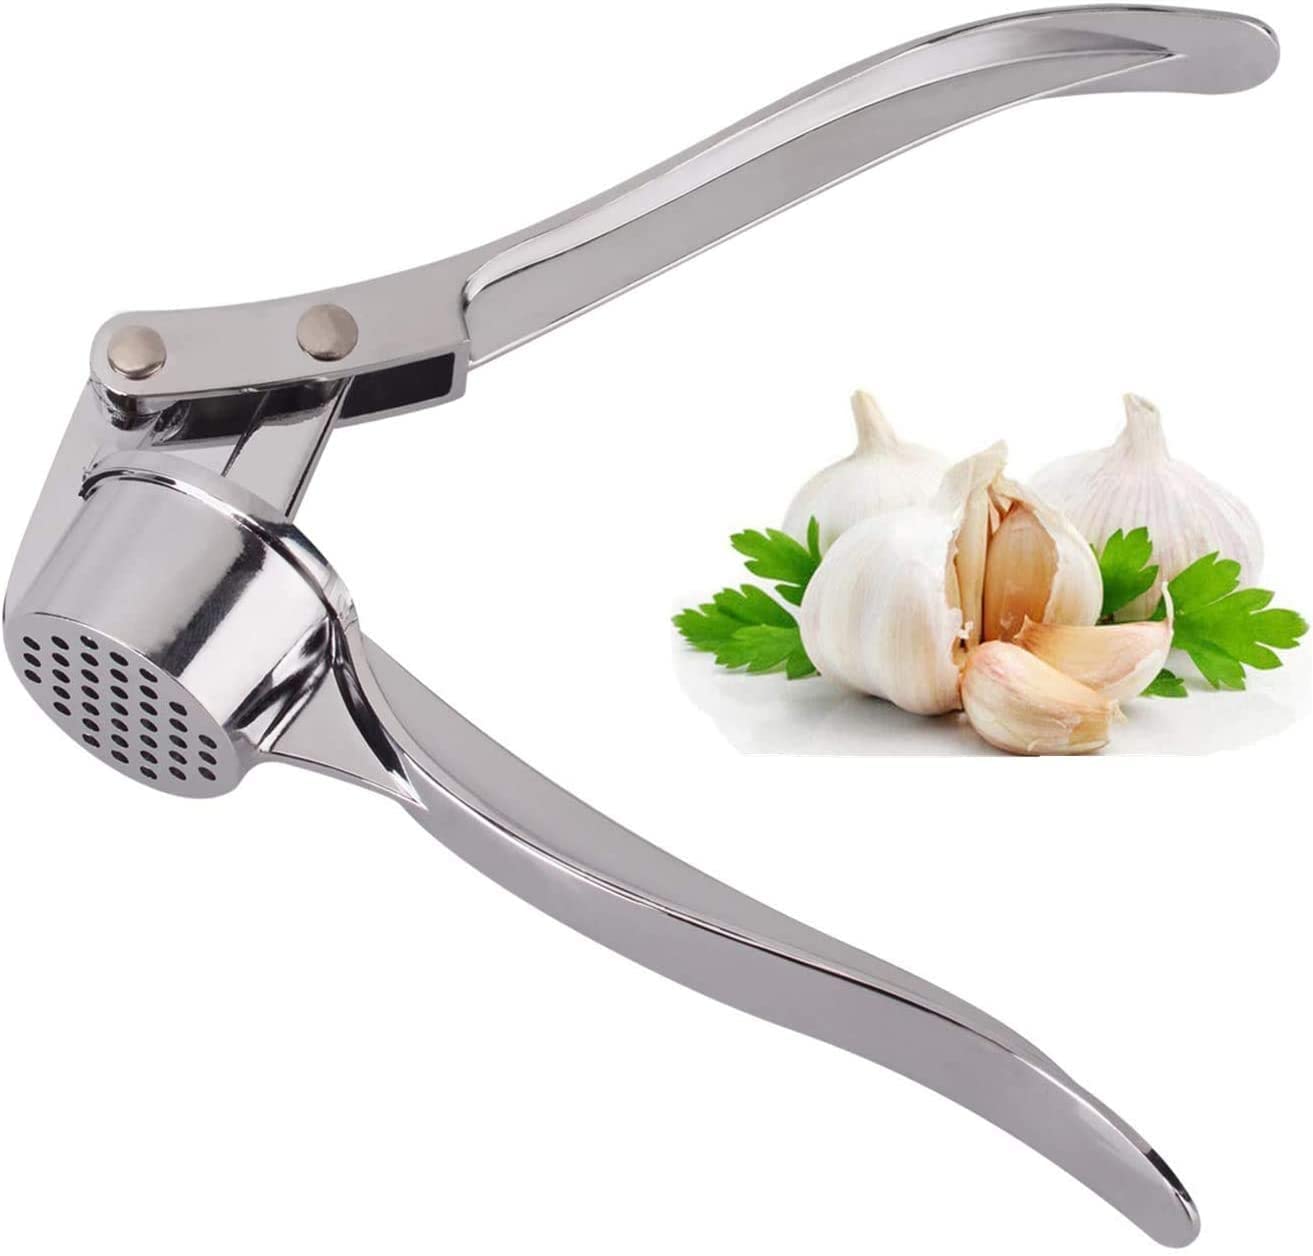 Vio Professional Kitchen Garlic Press, Garlic Mincer Ginger Crusher, Peeler Squeezer Heavy Duty Garlic Presser,Garlic Crush, User-Friendly Garlic Chopper, Easy to Clean and Durable